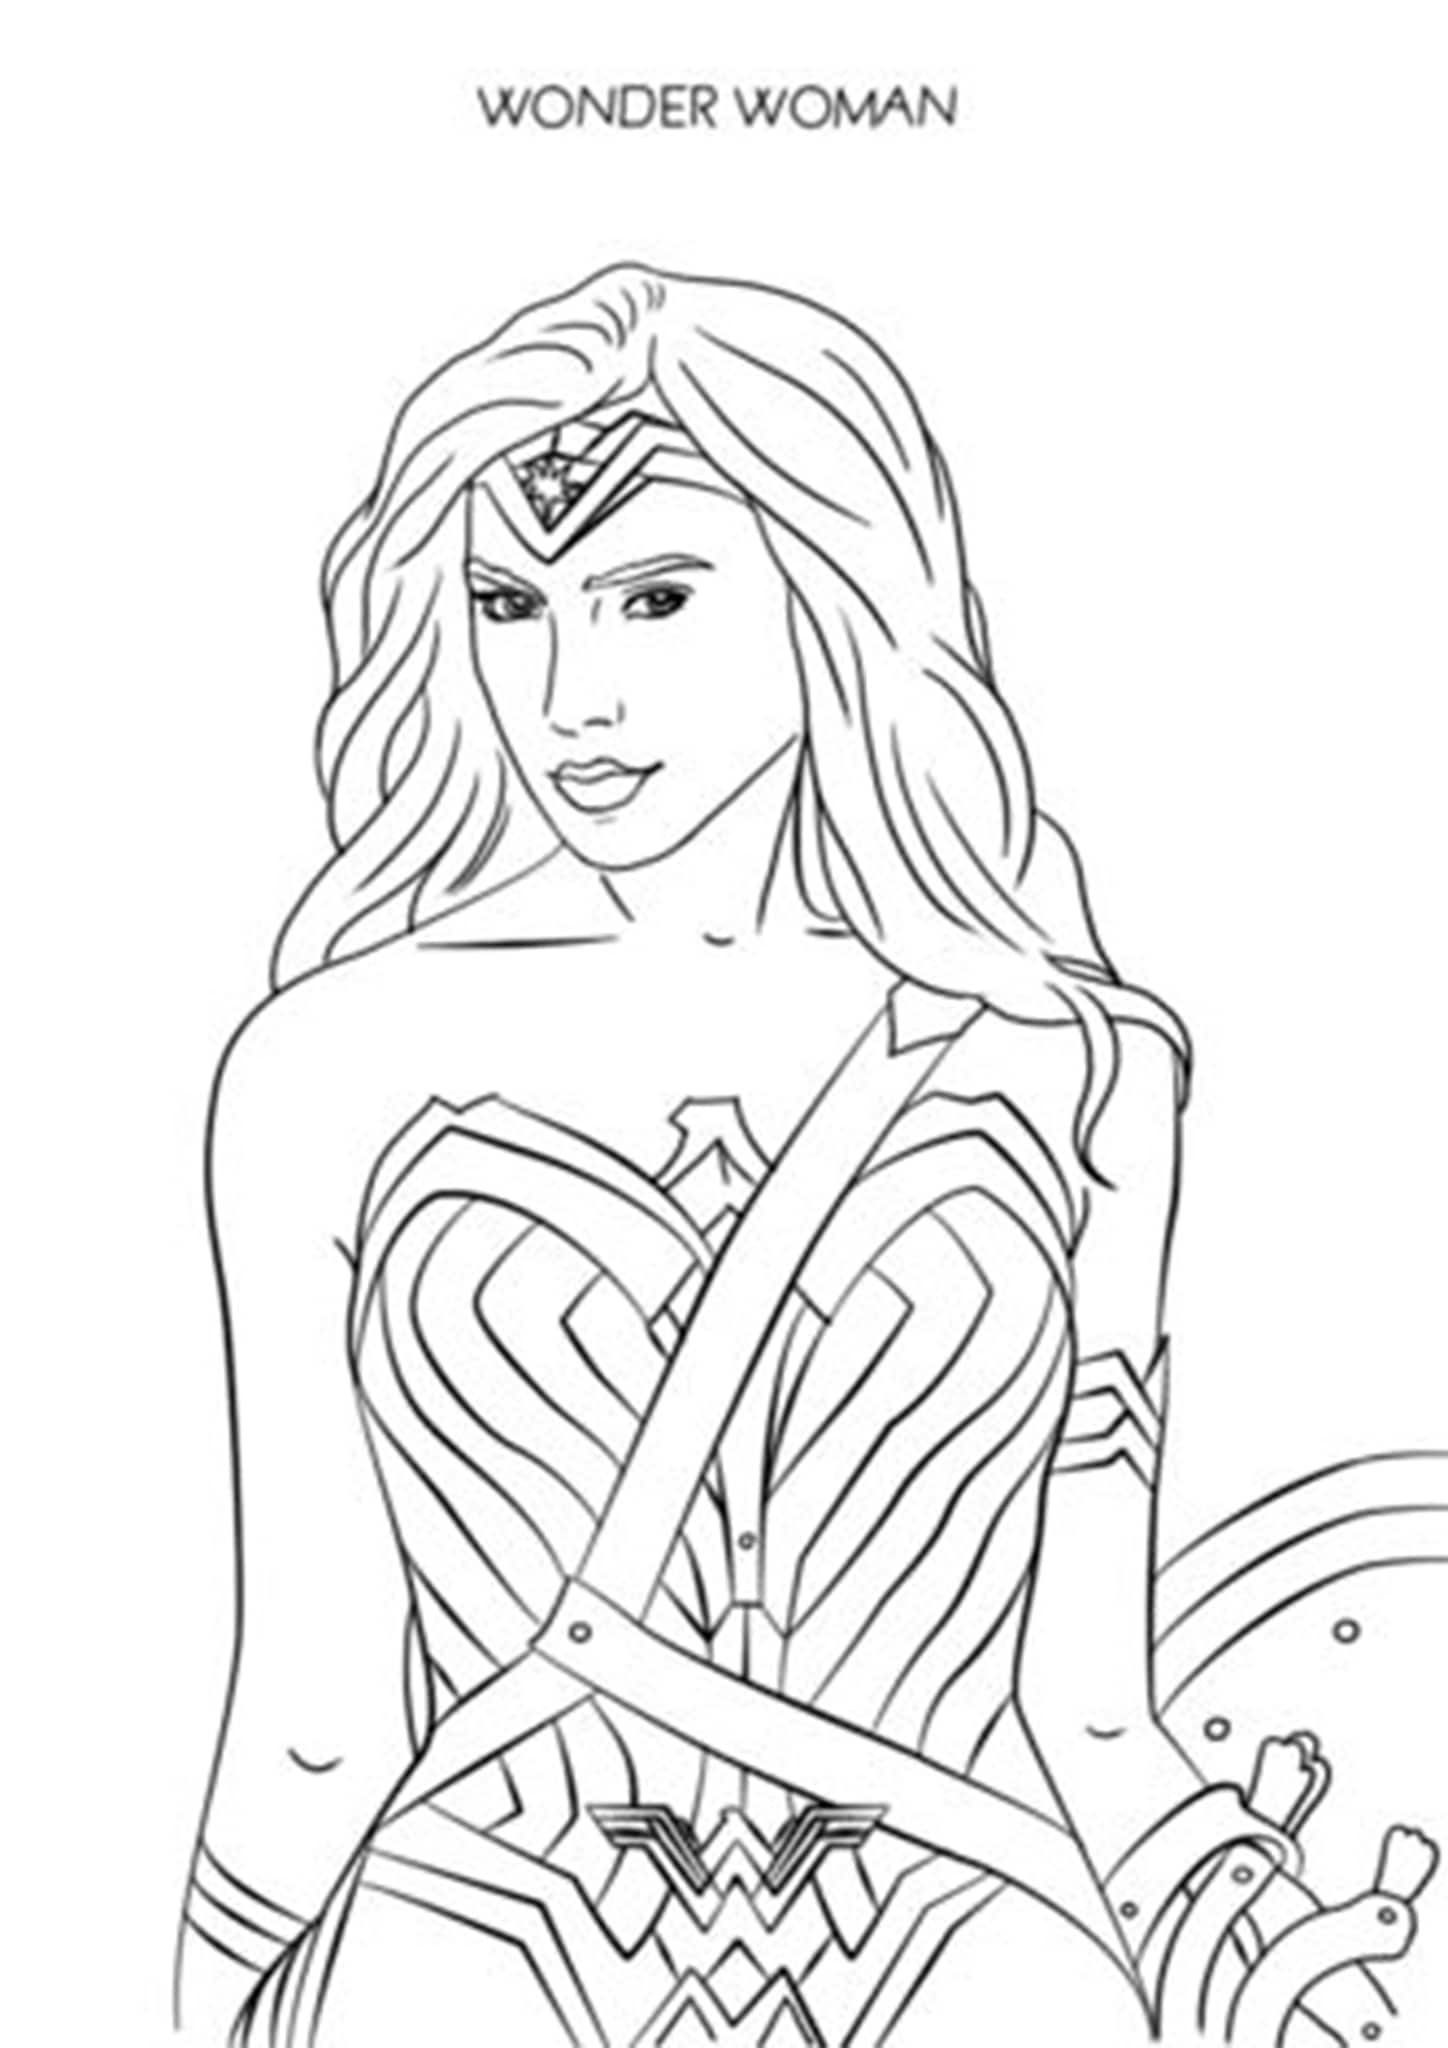 Free easy to print wonder woman coloring pages superhero coloring superhero coloring pages wonder woman art